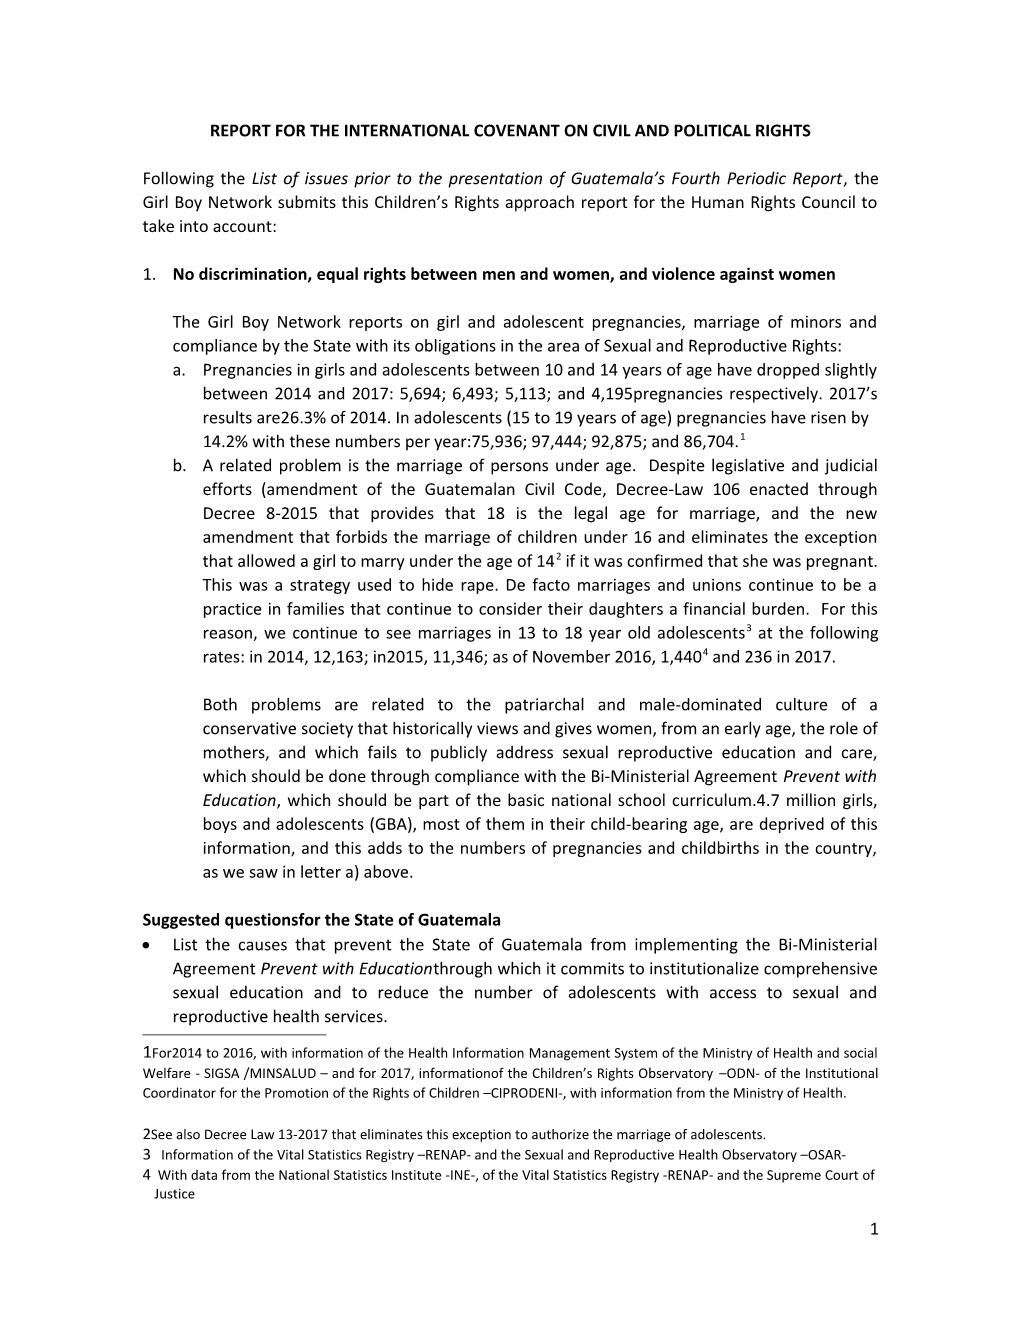 Report for the International Covenant on Civil and Political Rights